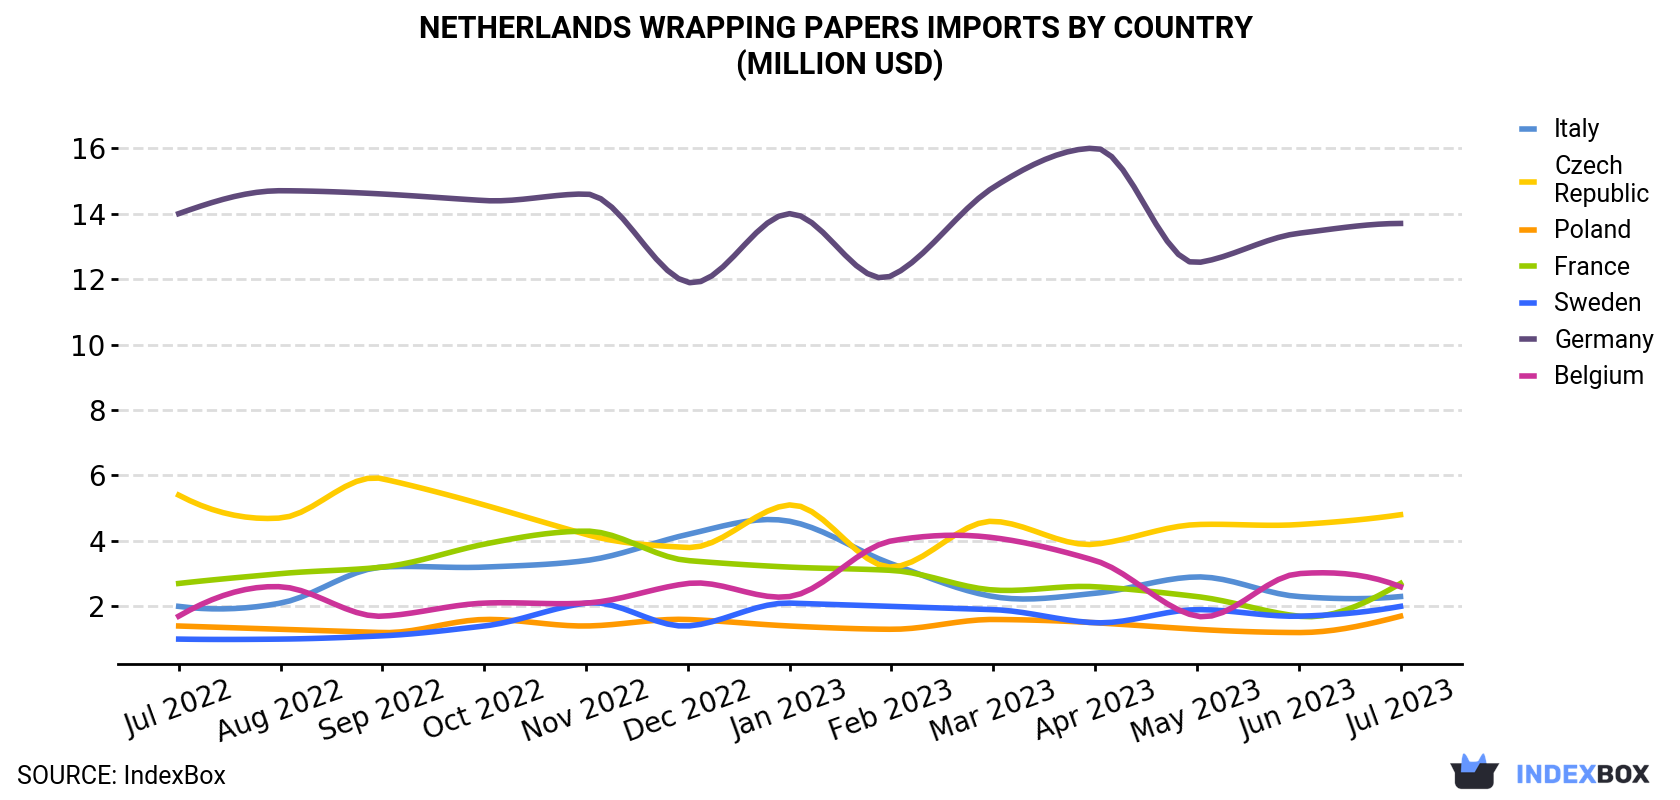 Netherlands Wrapping Papers Imports By Country (Million USD)